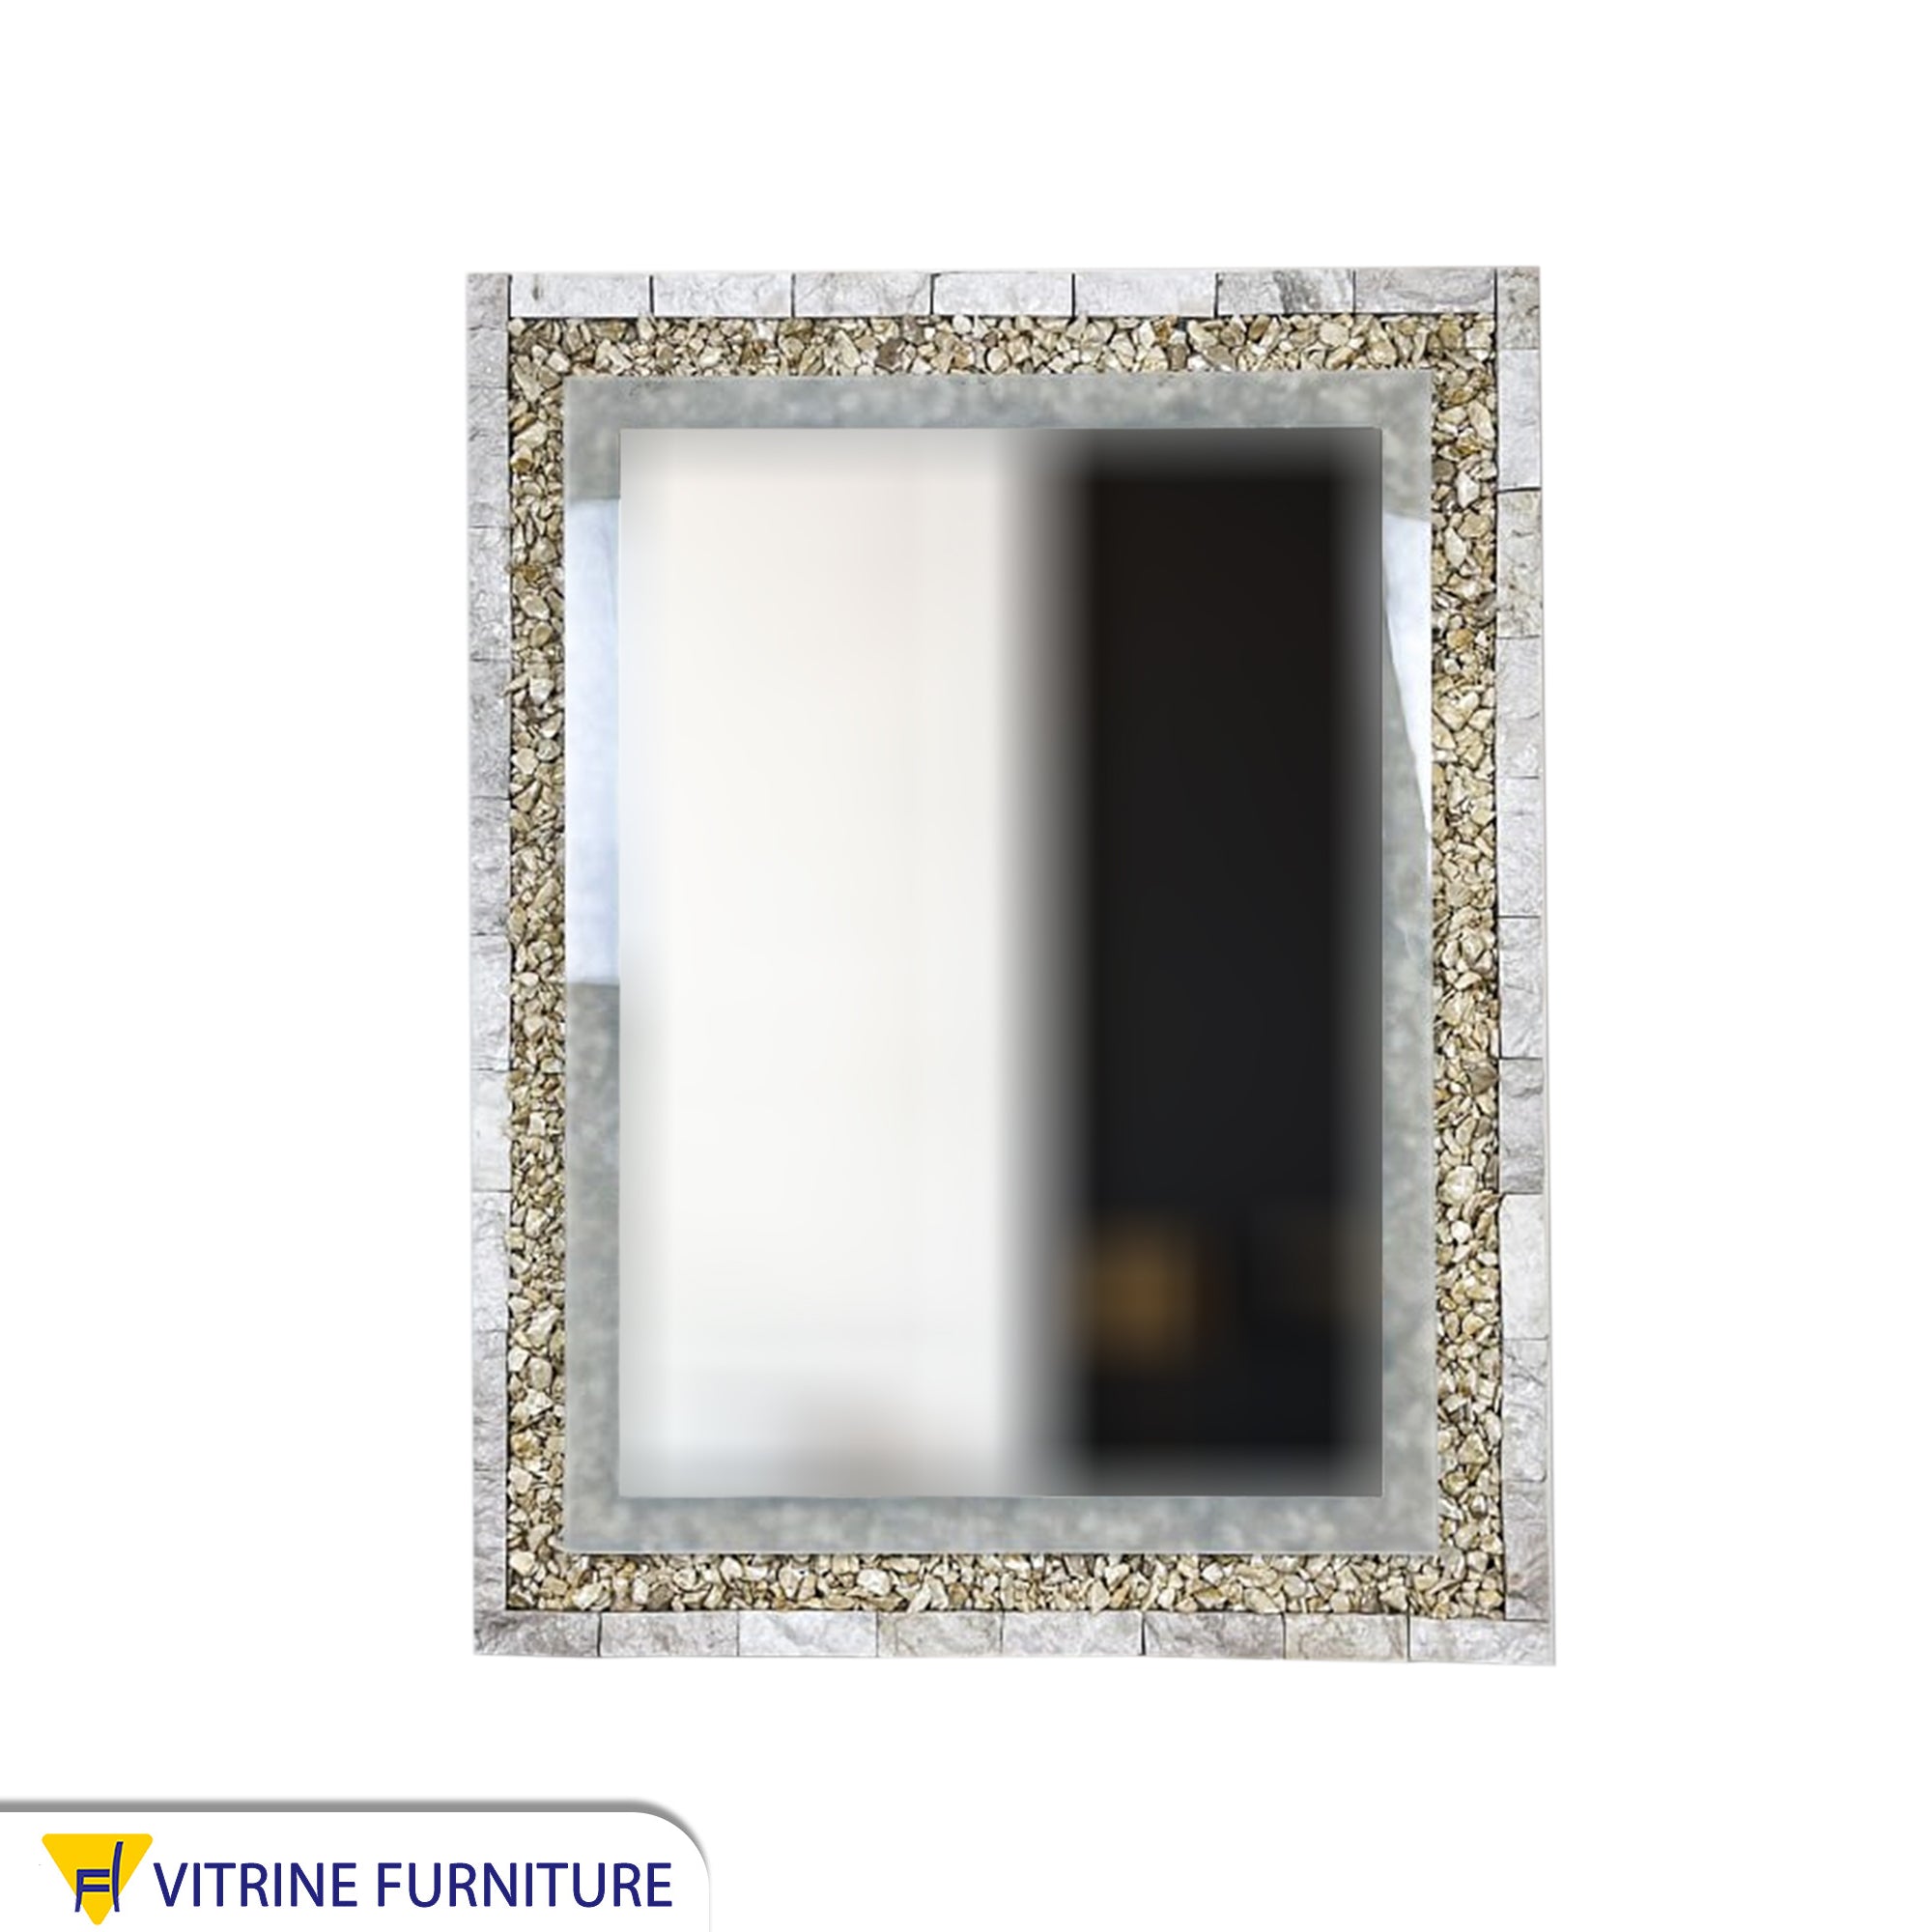 Rectangular mirror with a silver marble and stone frame